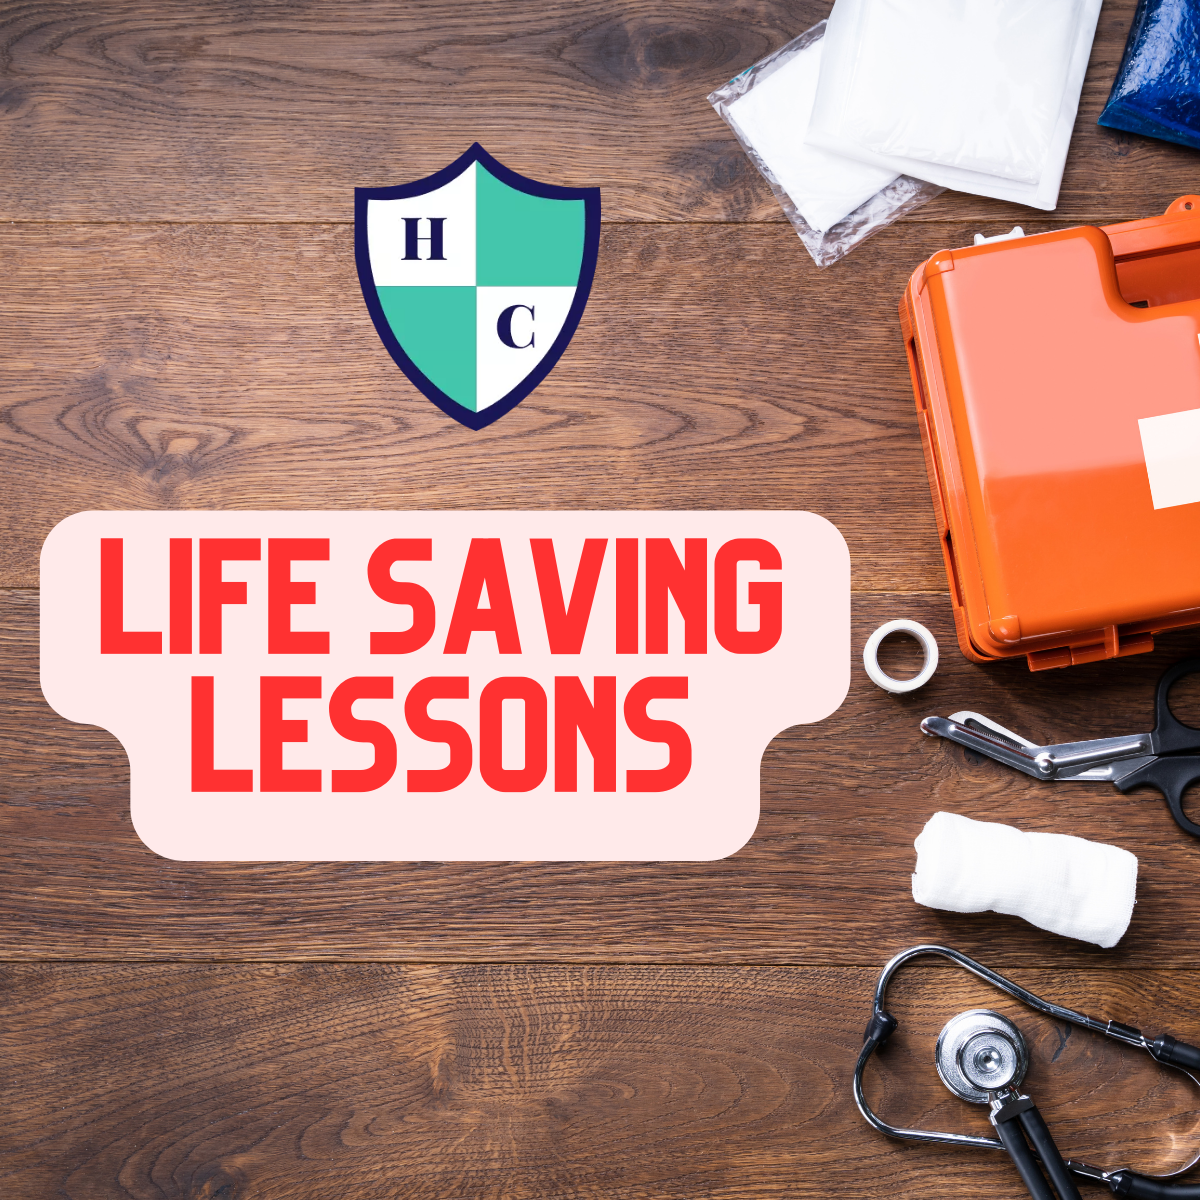 First-Aid, CPR, AED, BLS, ACLS Certification